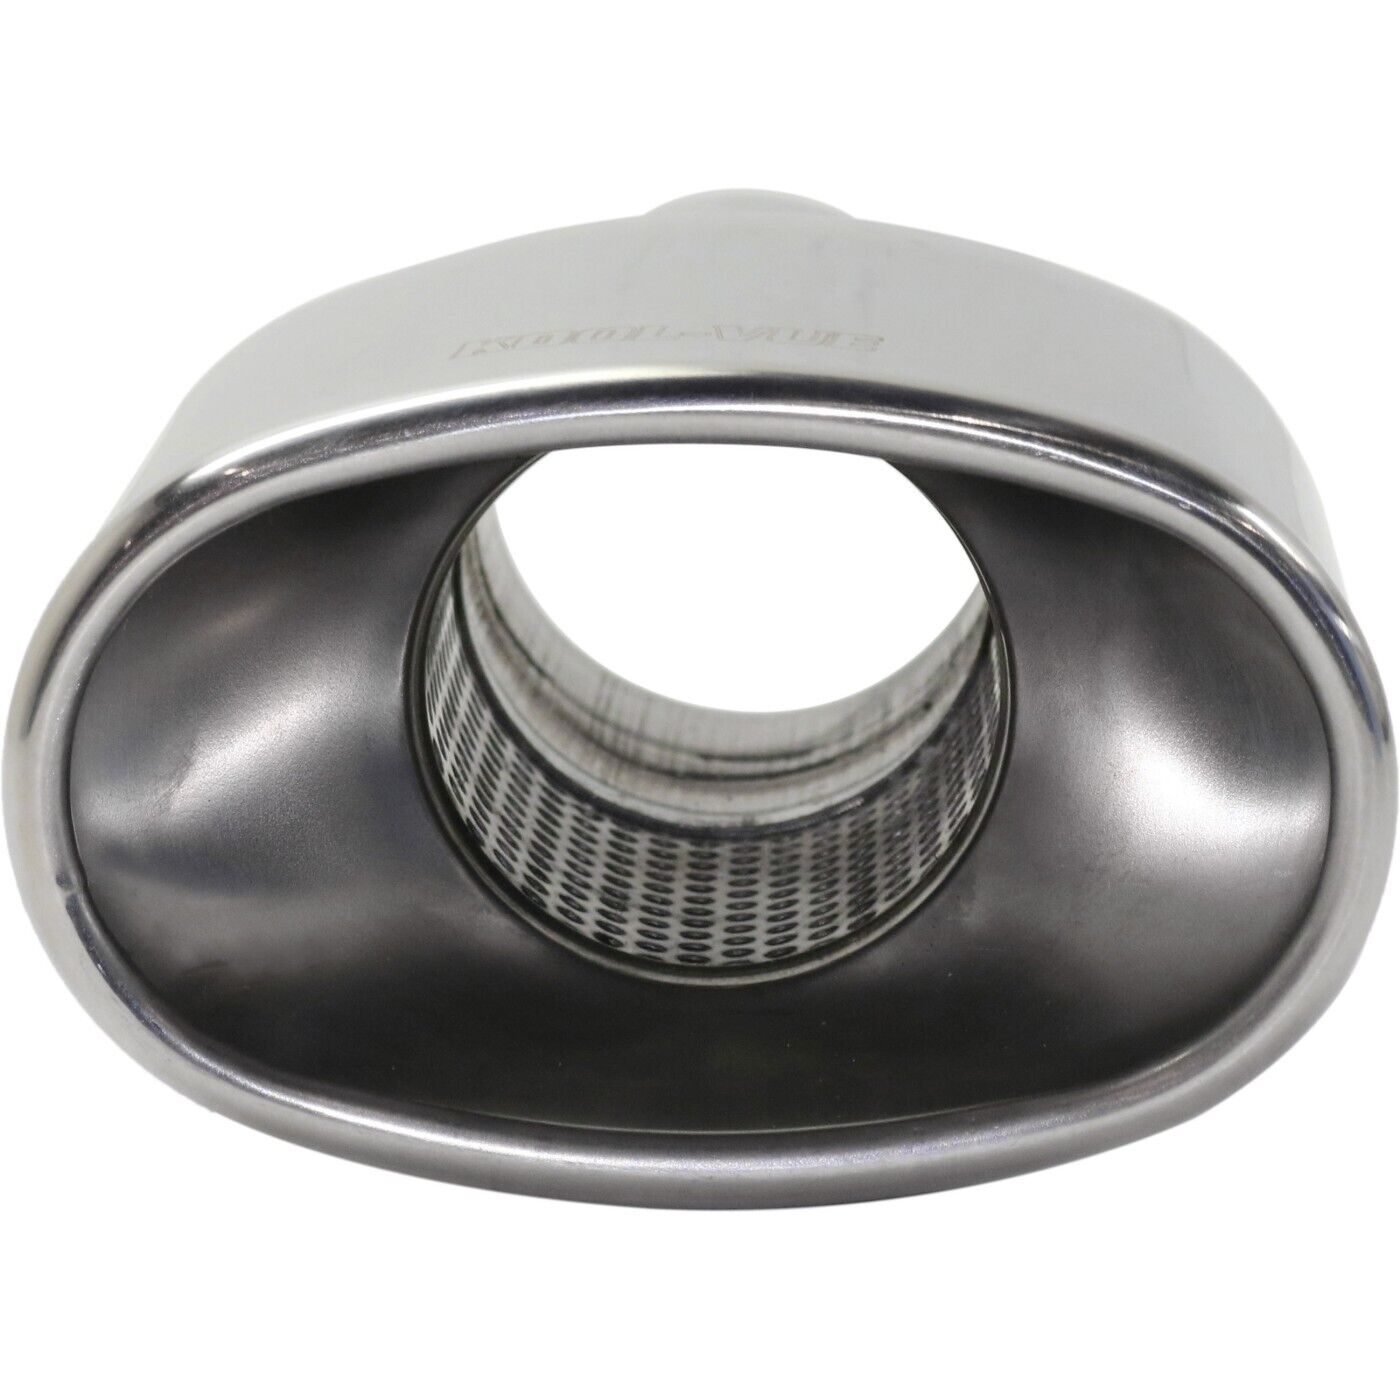 New Exhaust Tail Pipe Tip For Nissan Altima Nissan Maxima